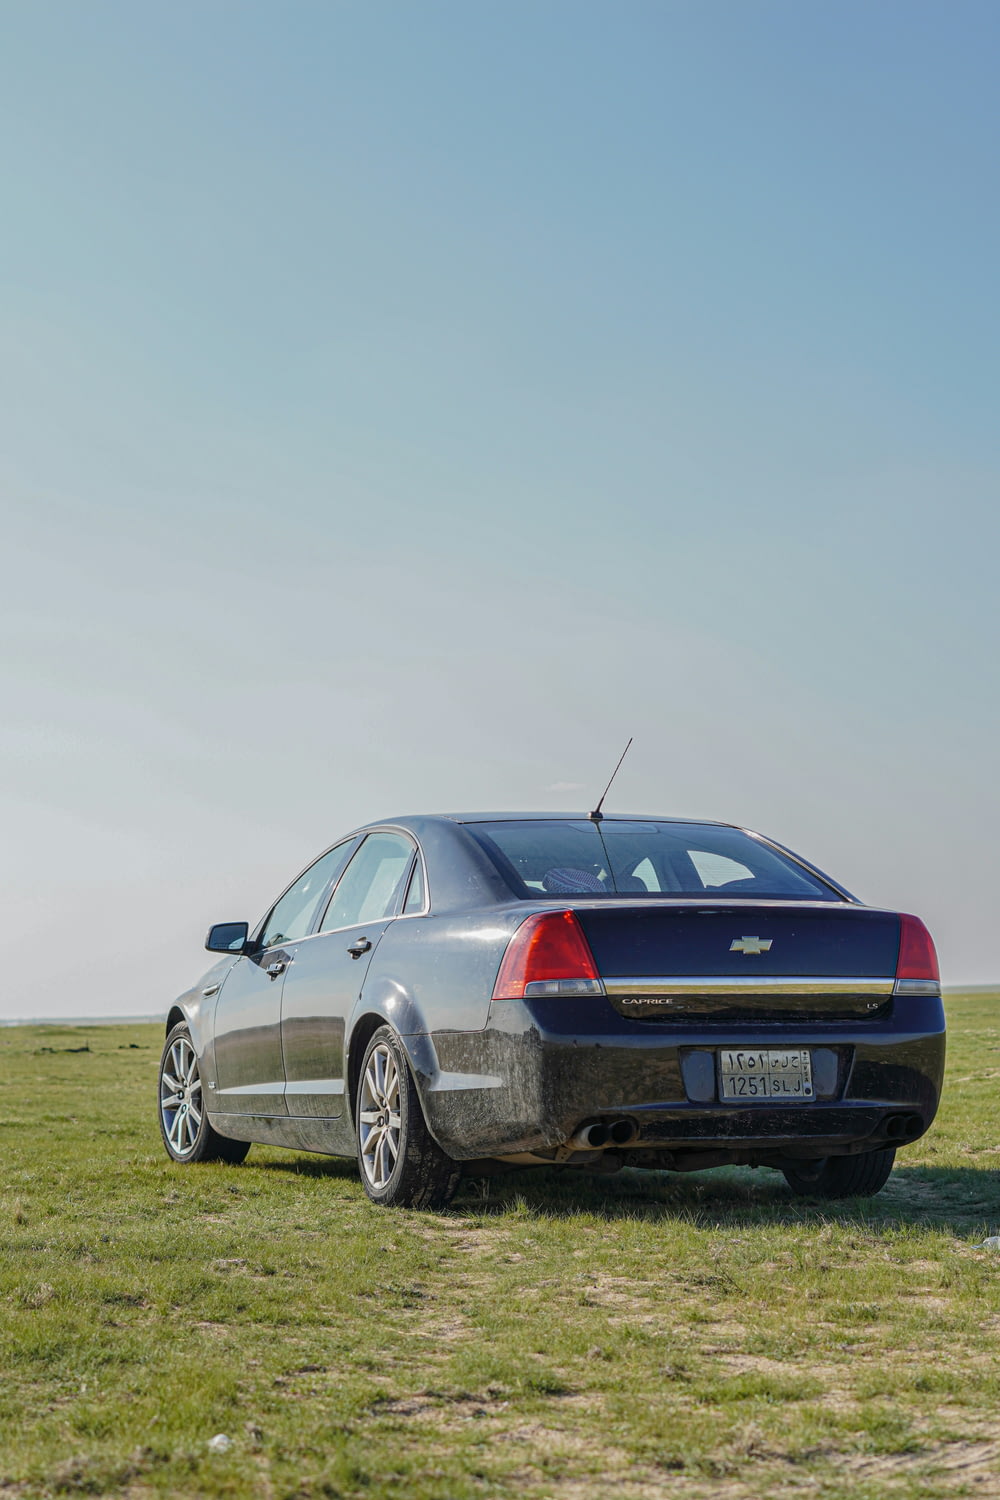 a silver car parked in a grassy field